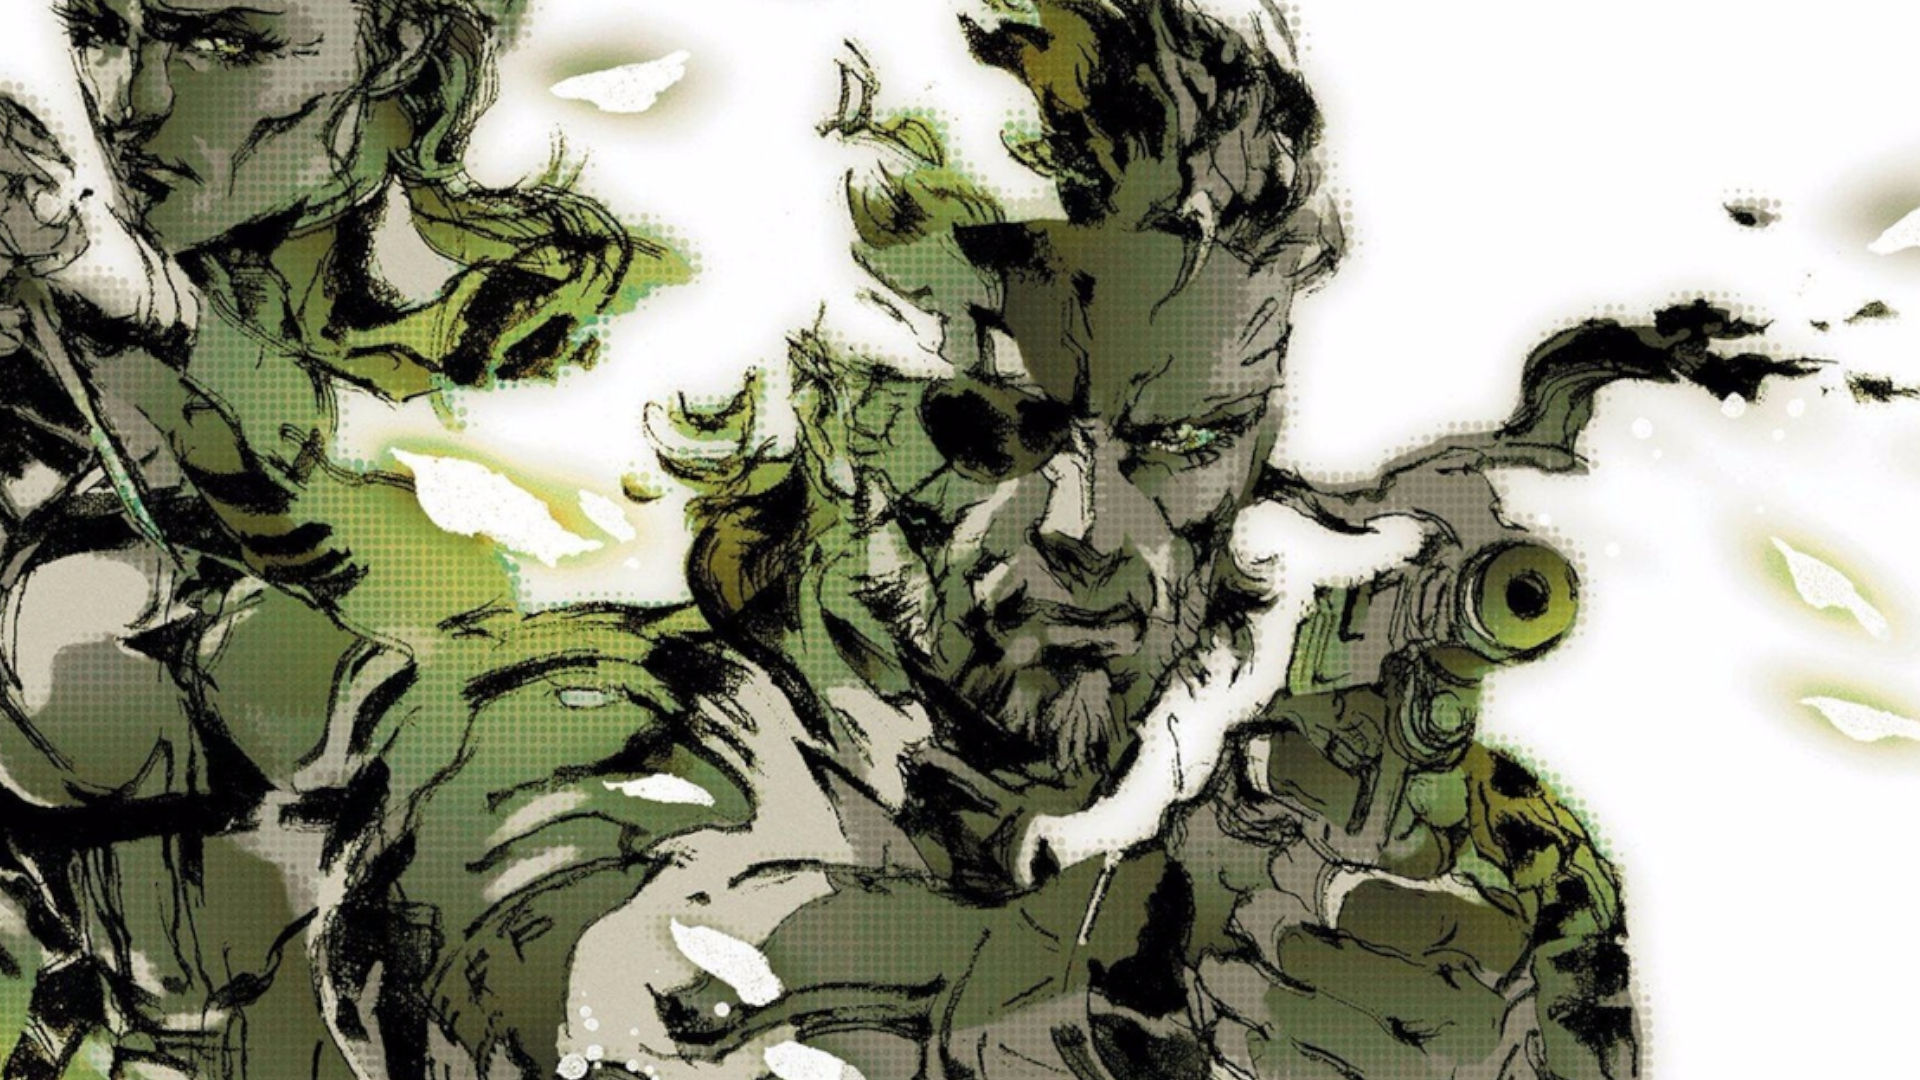 Metal Gear Solid Master Collection Vol. 1: Release date, games, platforms -  Dexerto